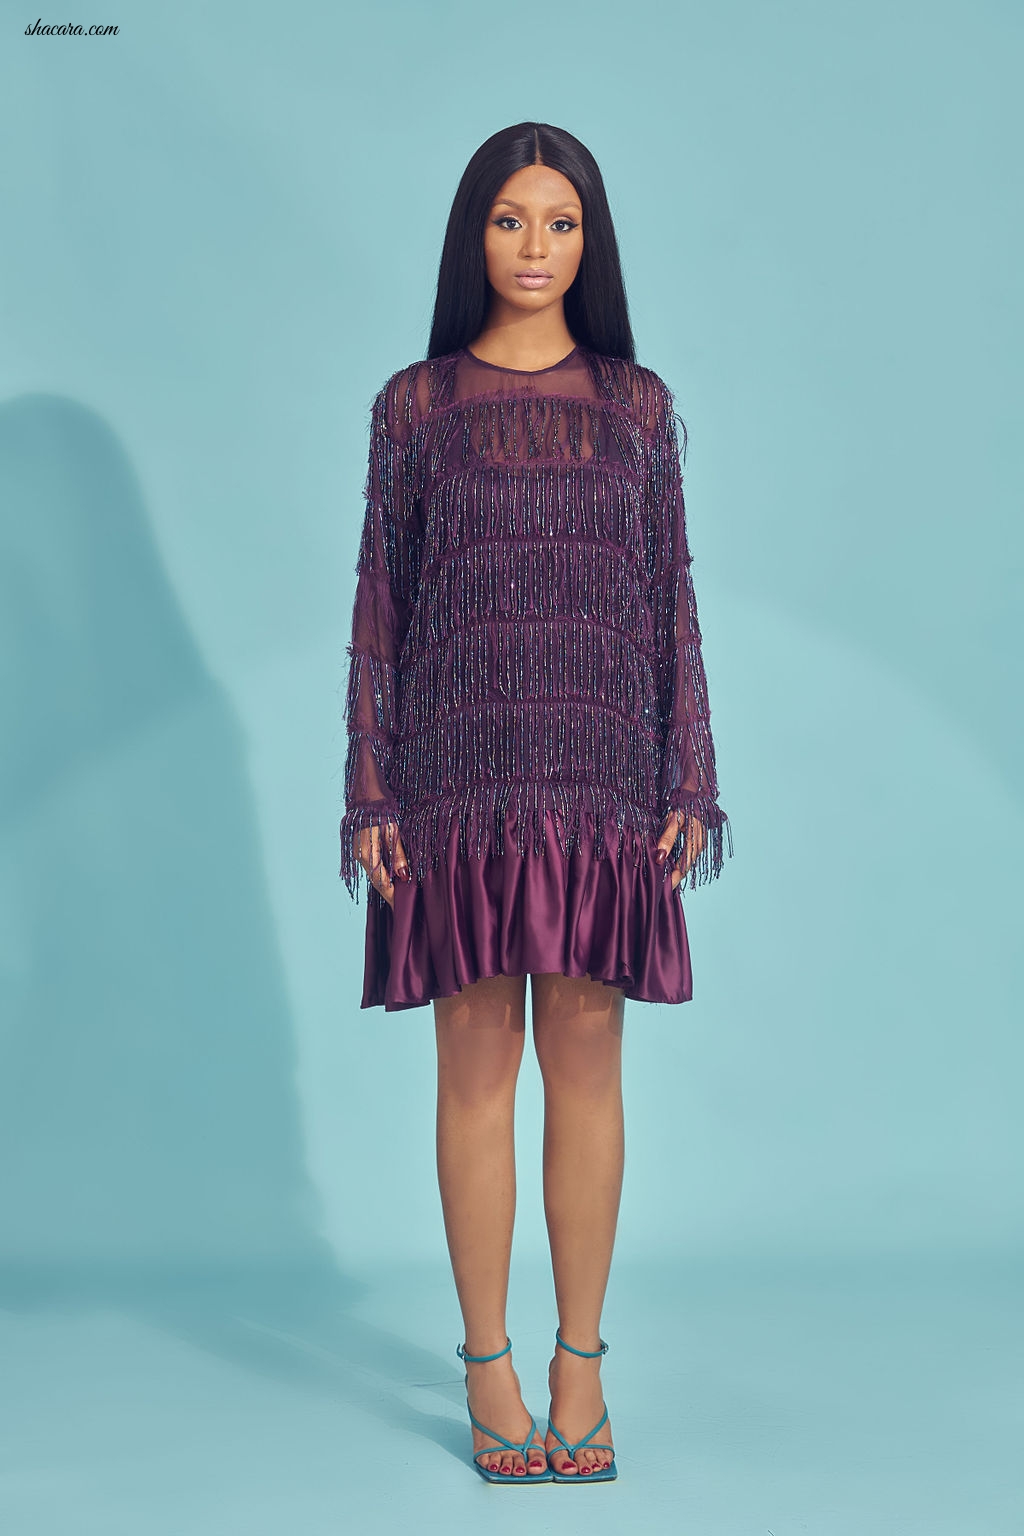 Here’s Every Piece From TIFÉ’s New Holiday Collection Starring Kaylah Oniwo